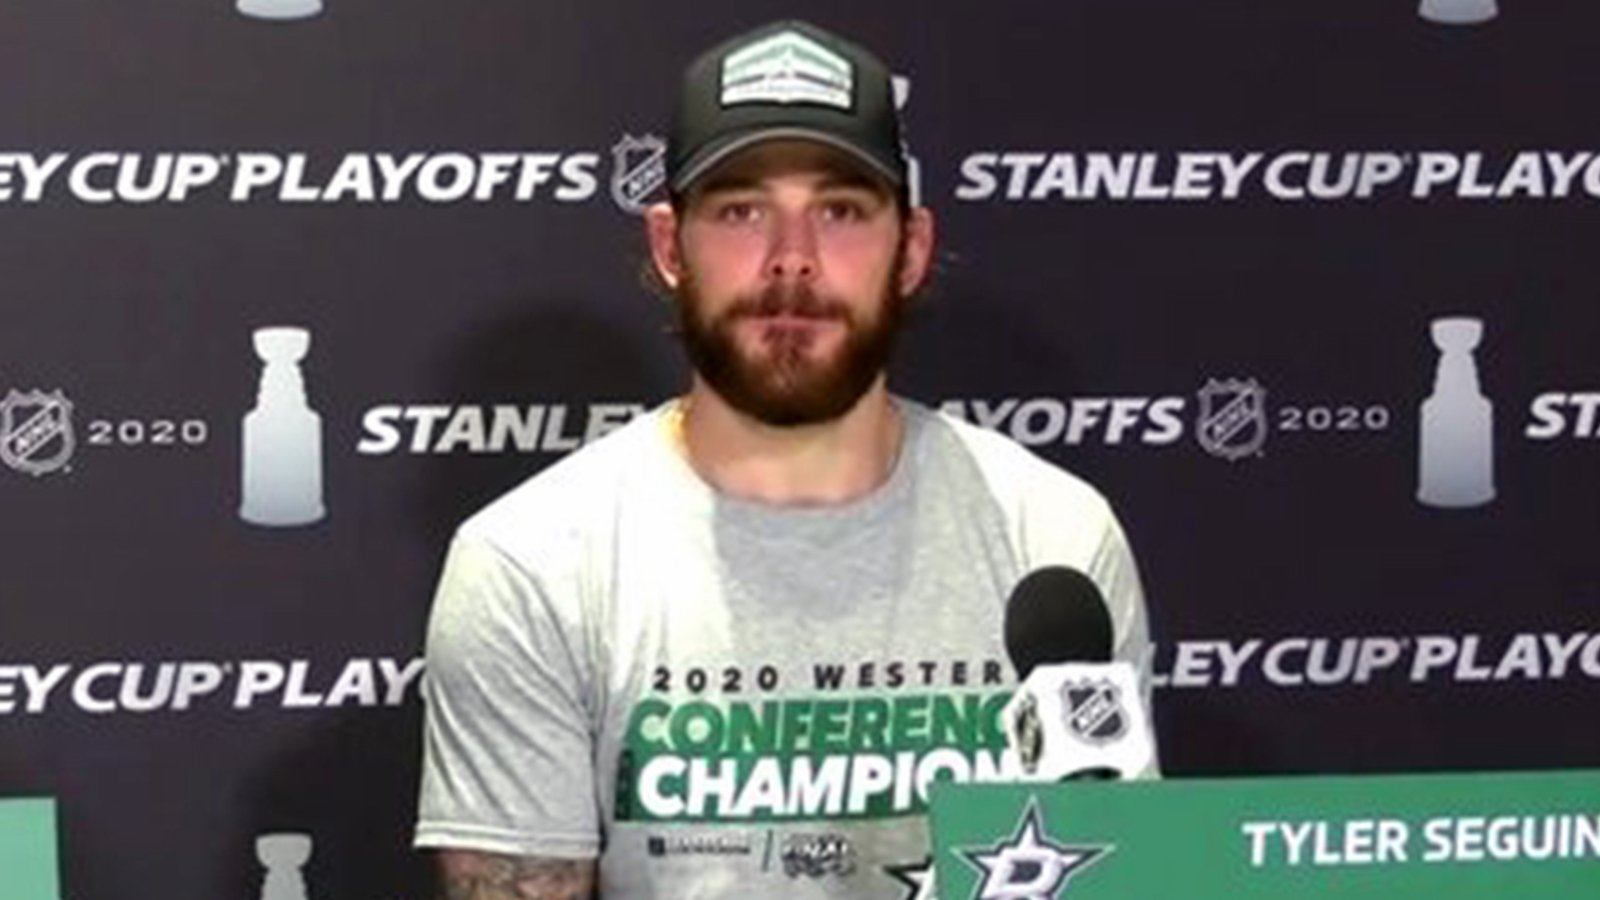 Seguin dunks on the entire analytics community after Stars advance to Stanley Cup Final